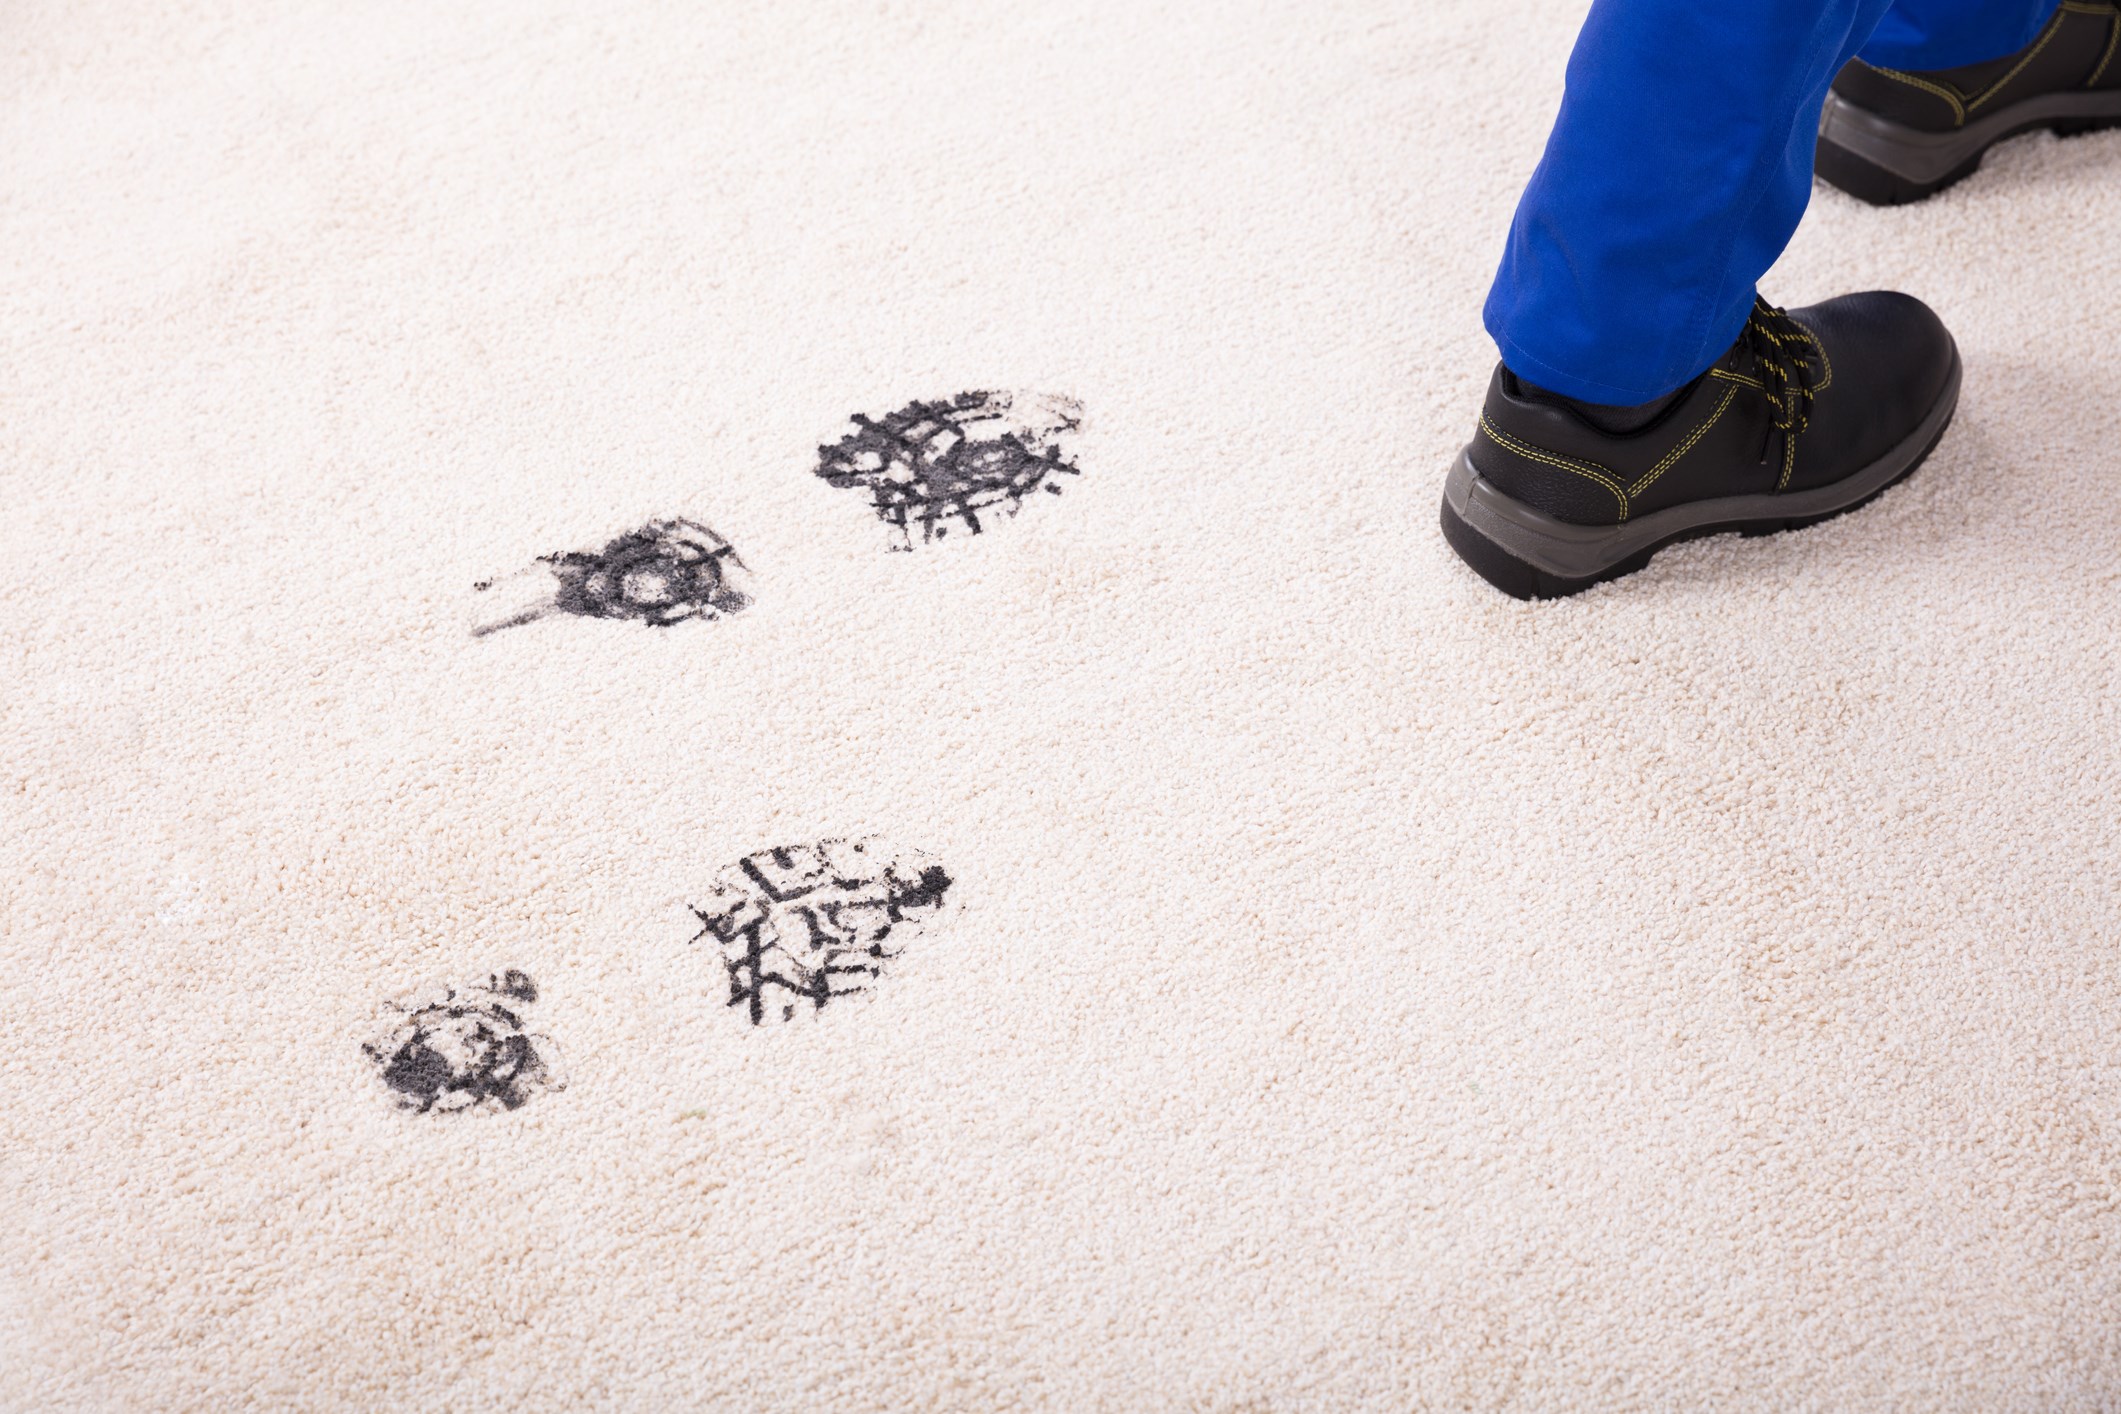 Planning to Move? BISSELL Pawsitively Clean 5 reasons why movers should deep clean.